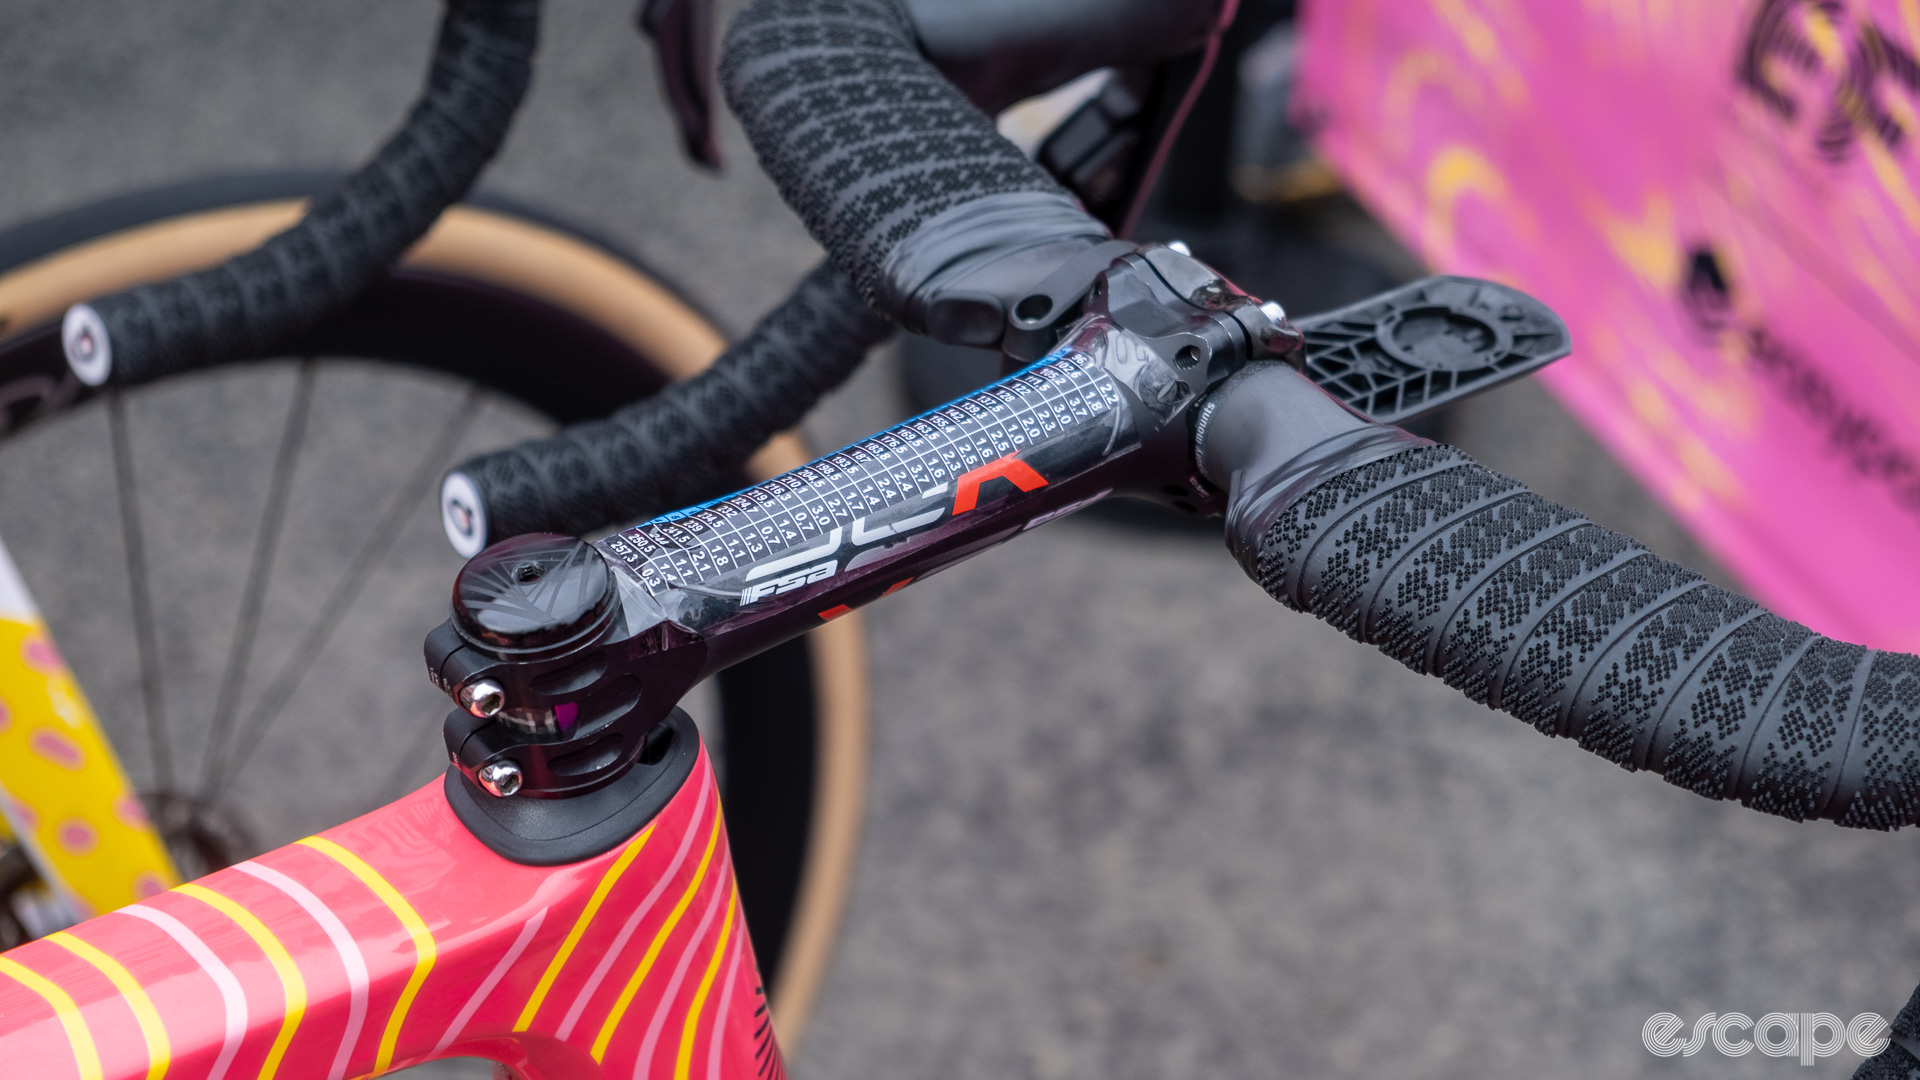 The image shows a handlebar and stem